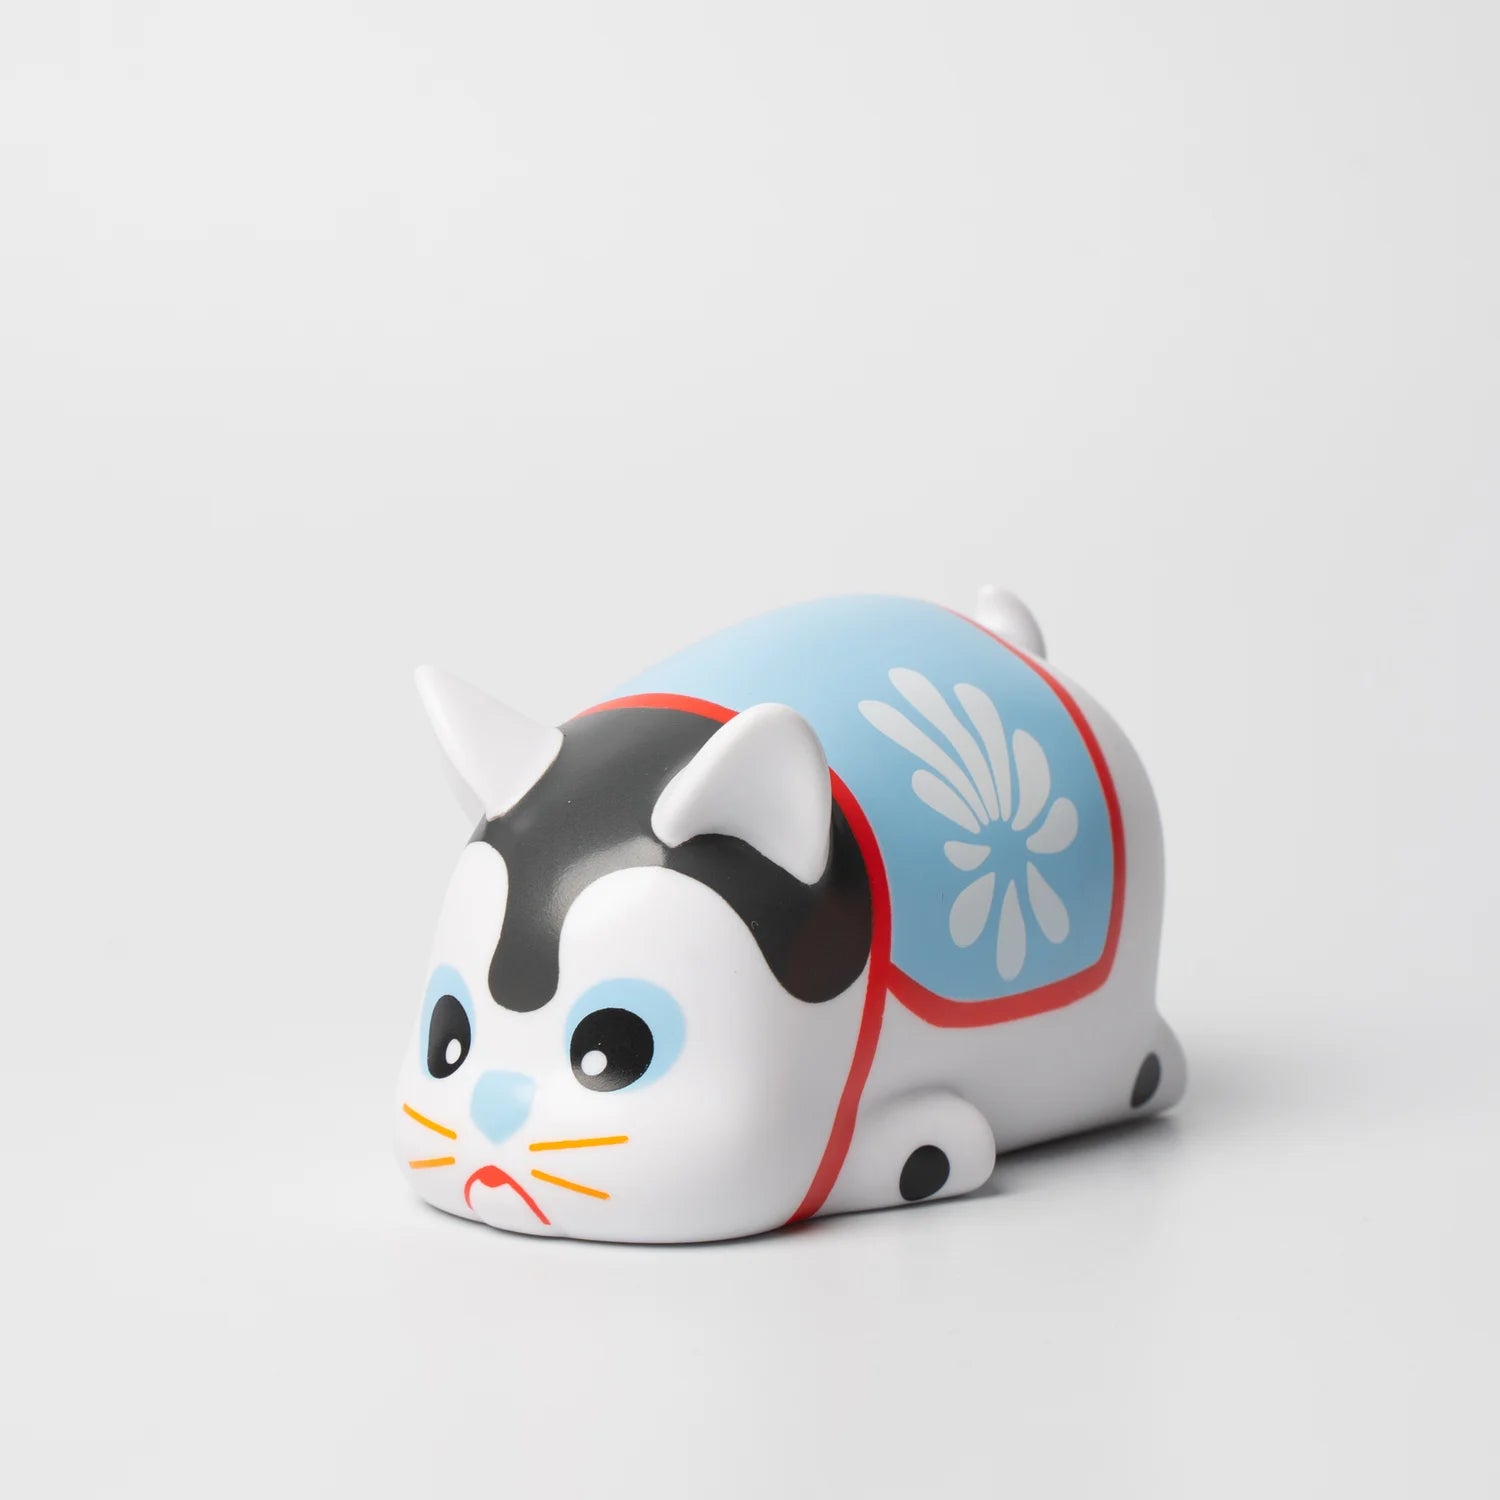 A blind box and art toy store presents NIMBUS HARIKO TTE EDITION. A small toy cat with a blue and white design, soft vinyl material, and hand-painted details by Paulus Hyu.